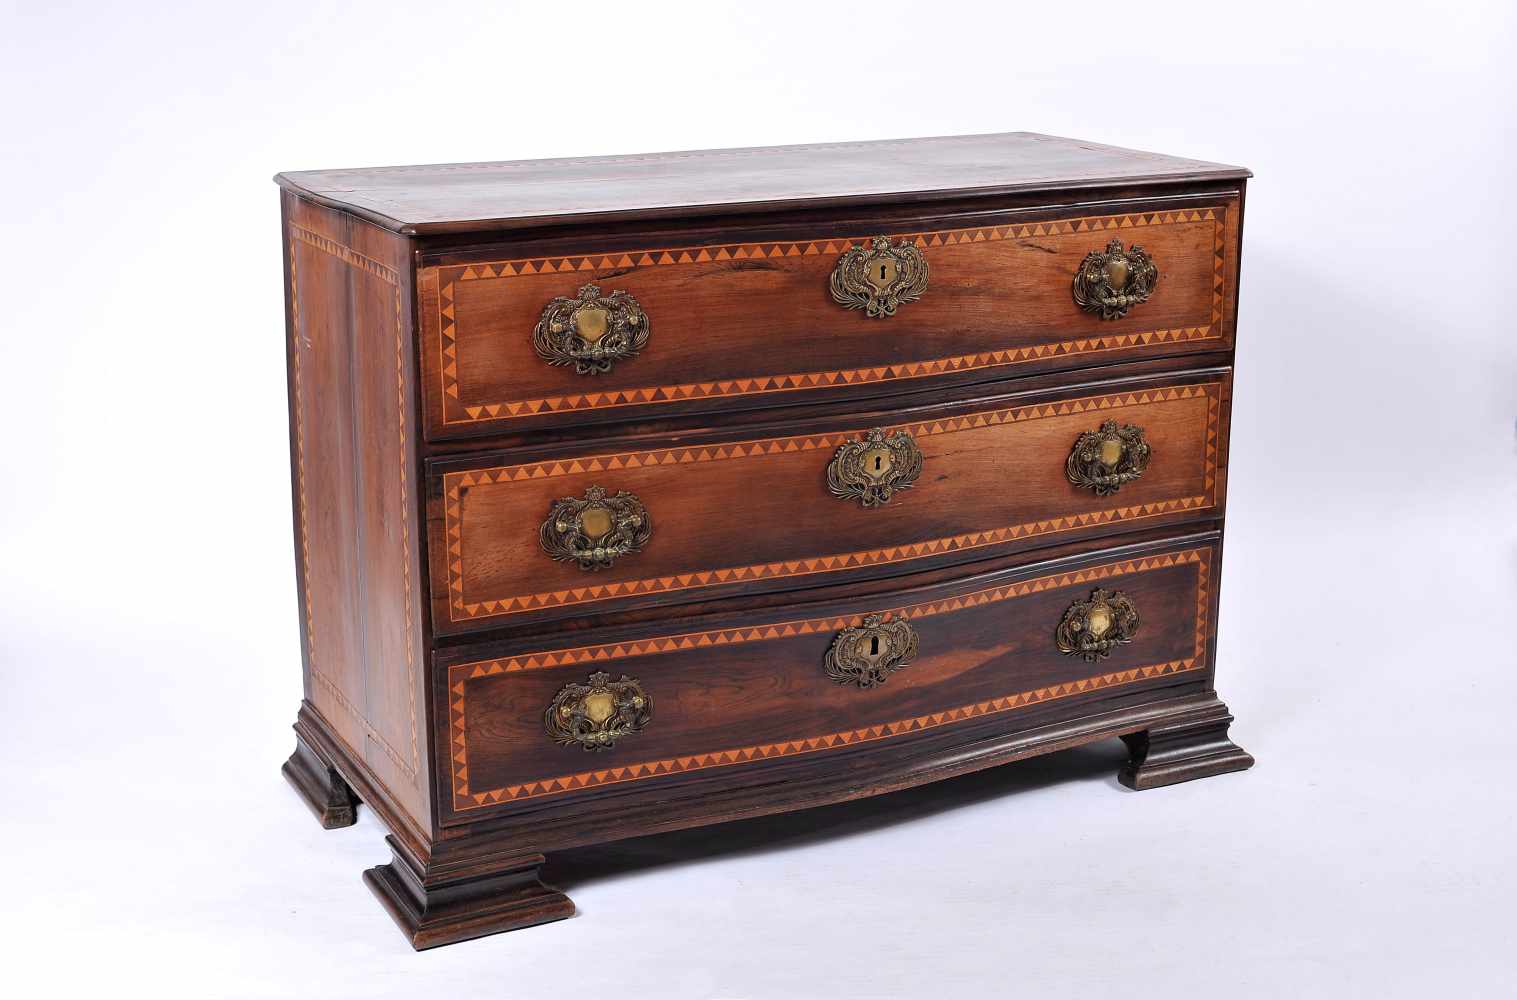 A Chest of Drawers, D. Maria I, Queen of Portugal (1777-1816), Brazilian rosewood, Brazilian